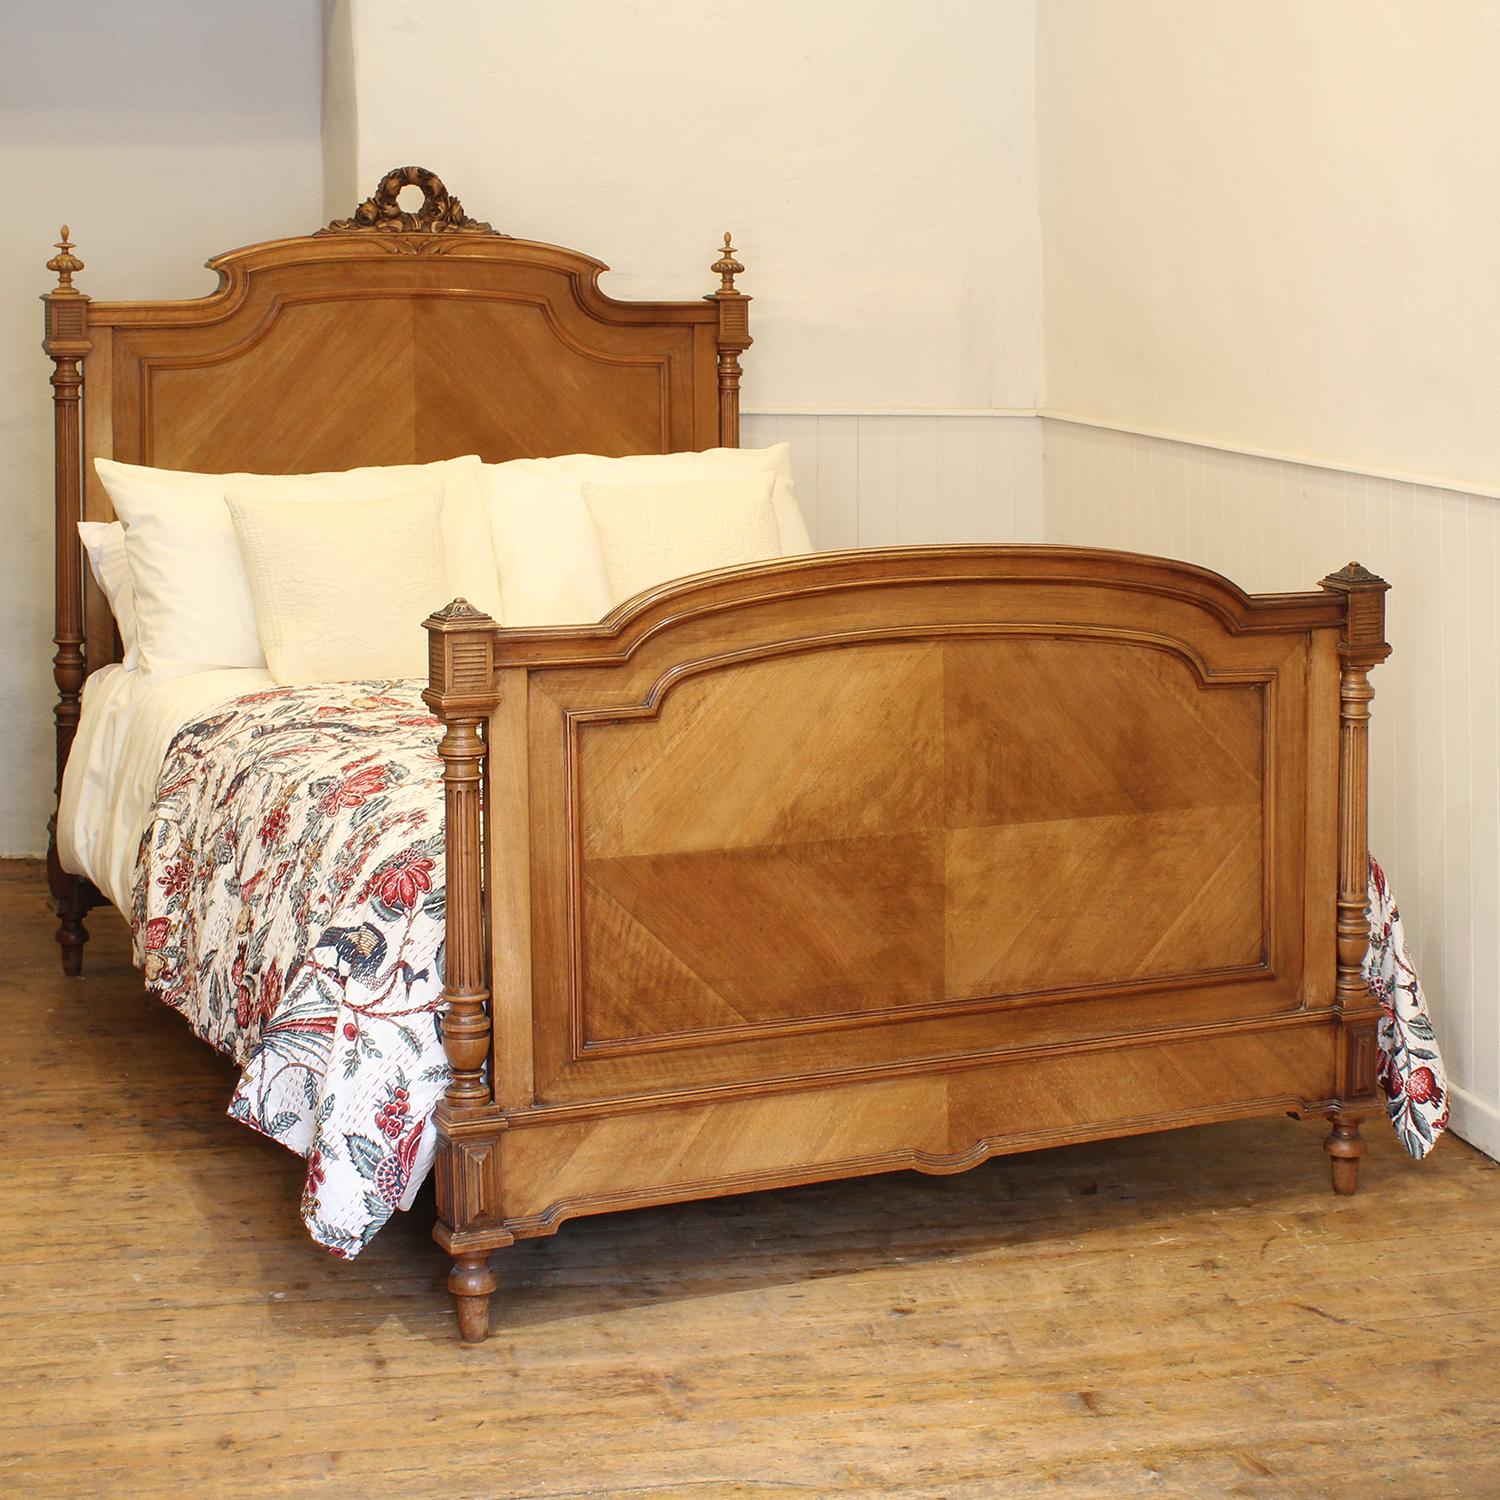 An attractive French walnut bedstead with quartered veneer panels, decorative pediment depicting a garland of roses, carved finials and fluted posts.

This bed accepts a standard double, 4ft 6in (54 in), base and mattress set.

The price is for